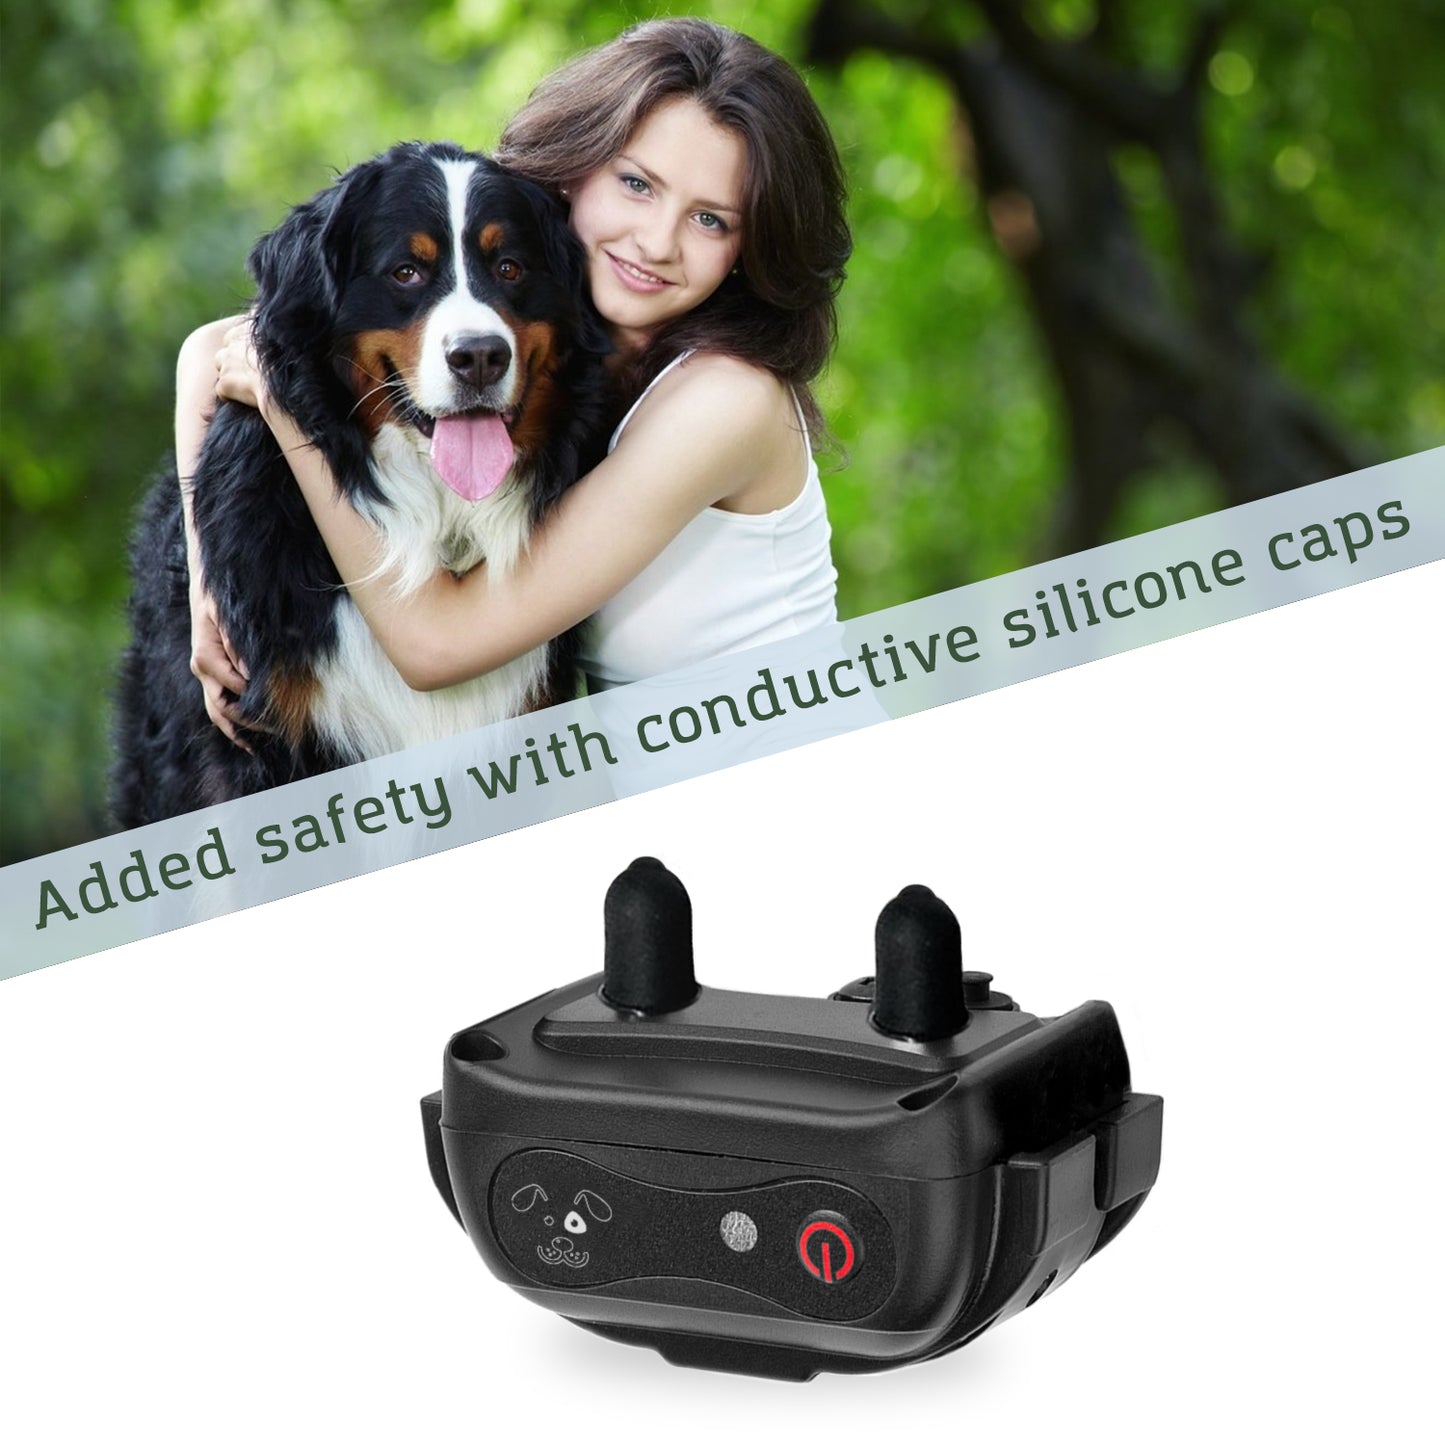 Added safety with conductive silicone caps for PetSpy Xpro dog training system